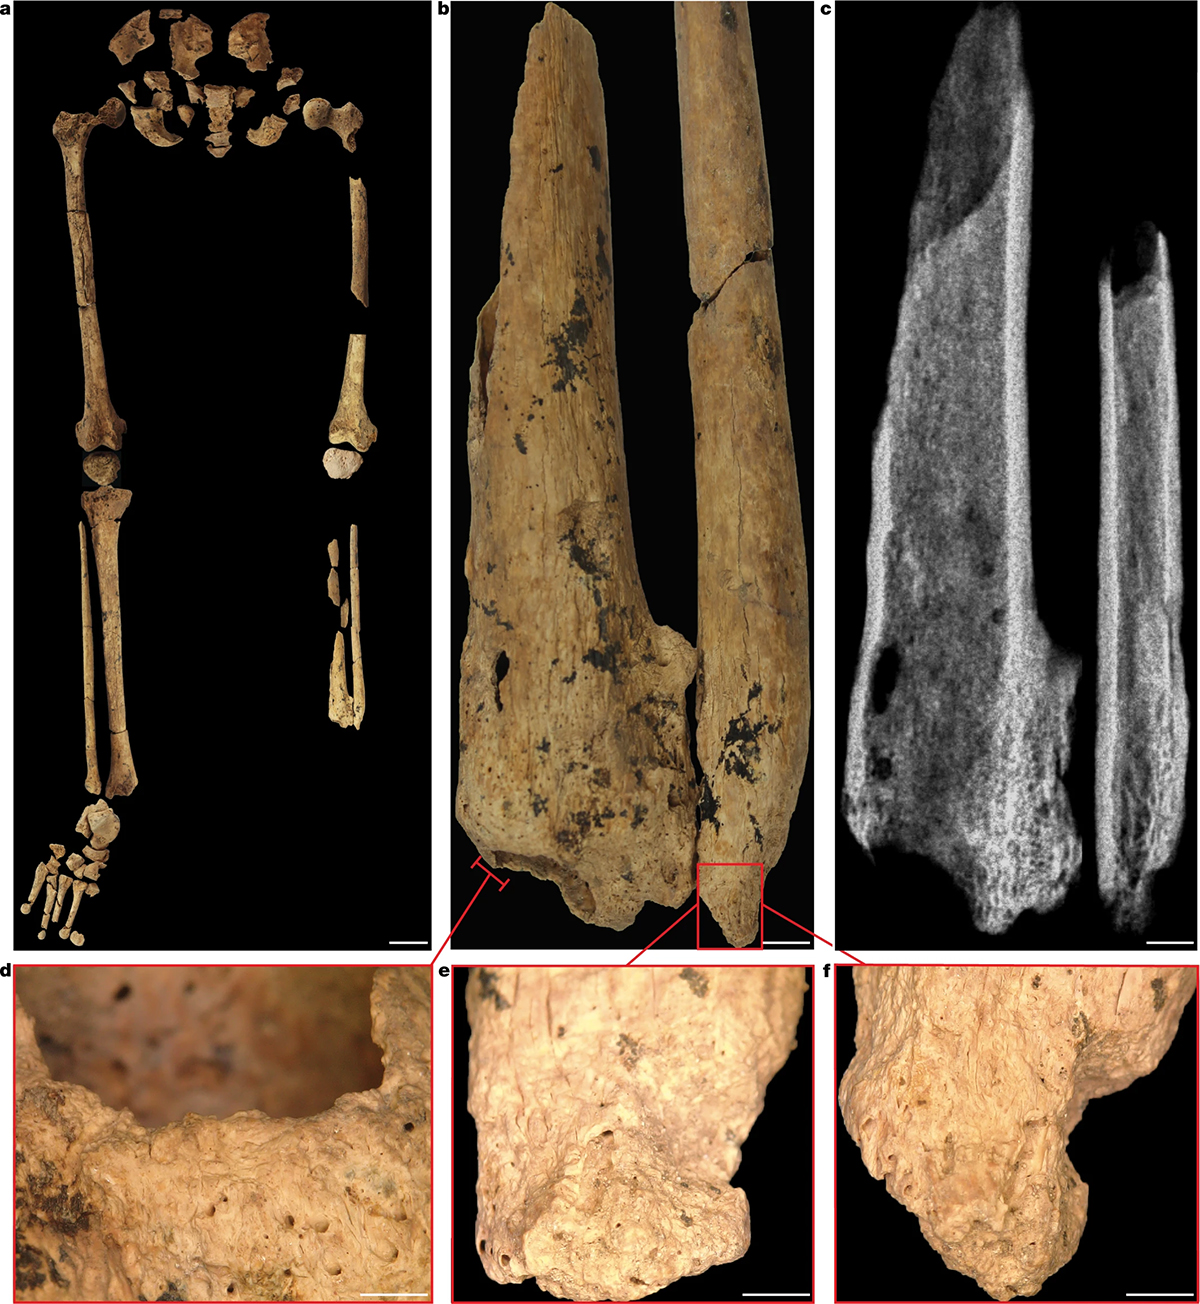 skeletal remains showing ancient amputation in Borneo